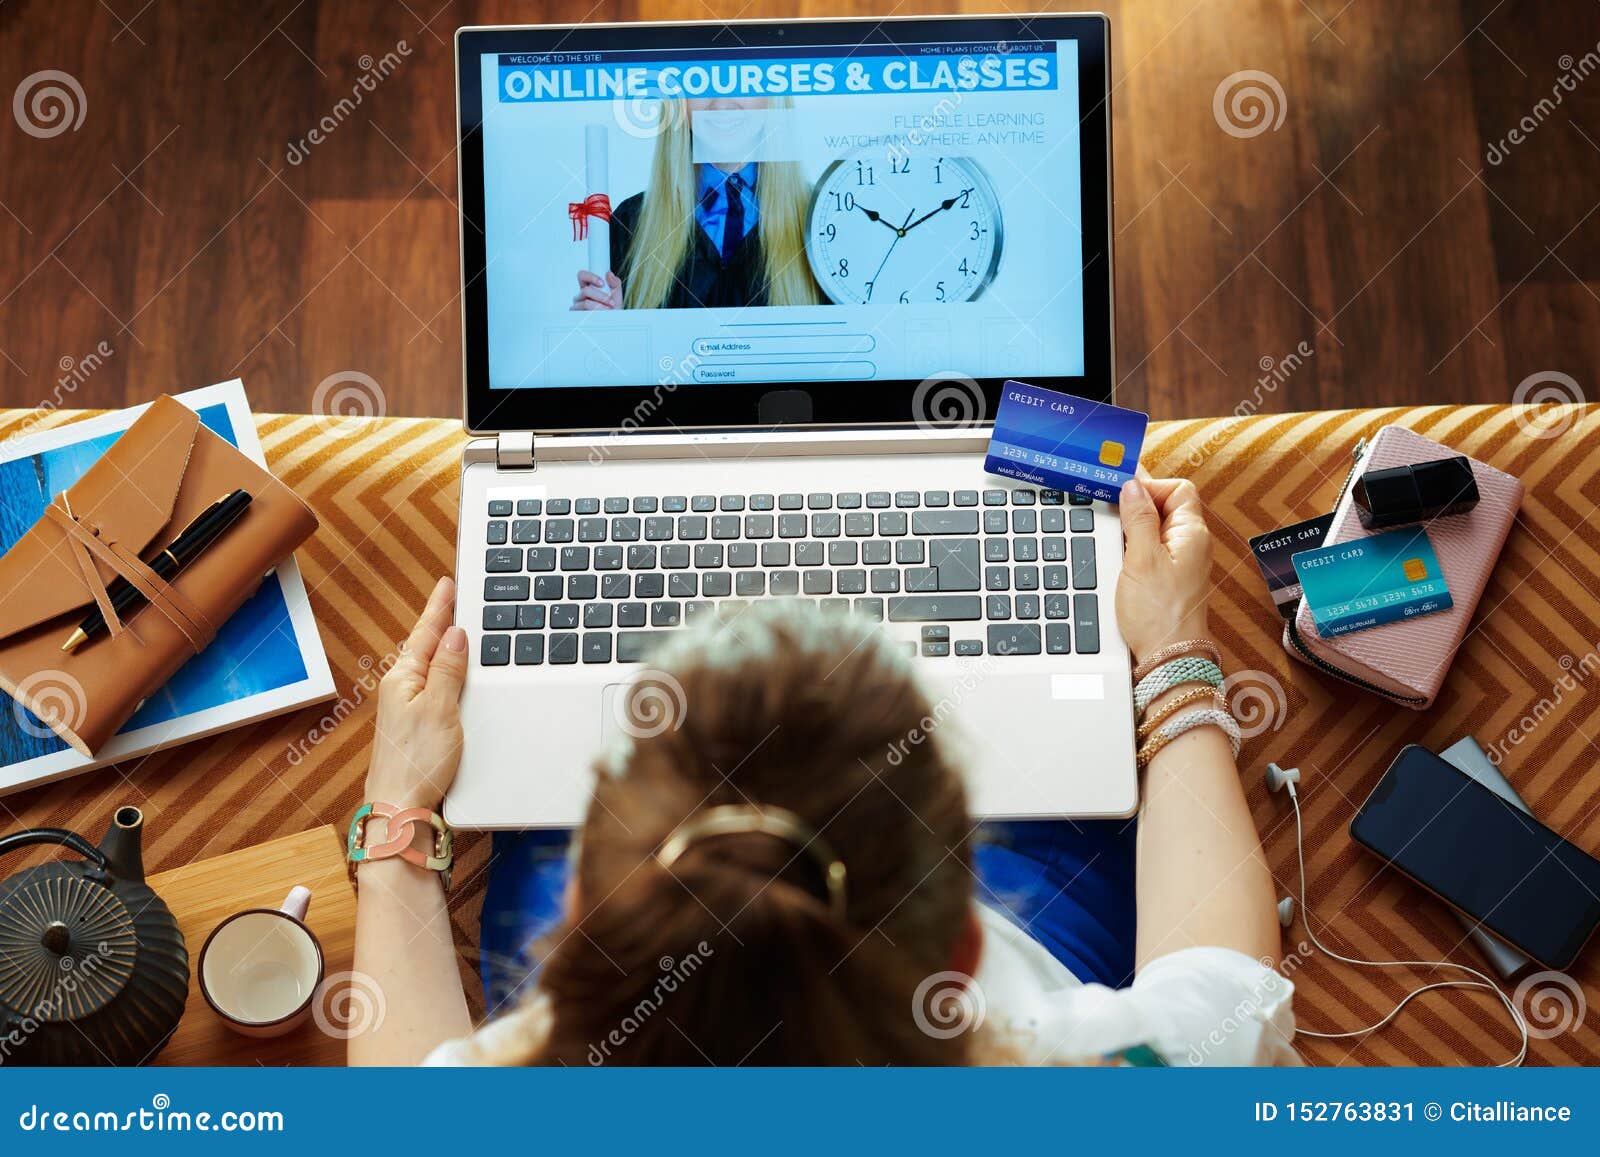 woman with credit card subscribing to computer courses website